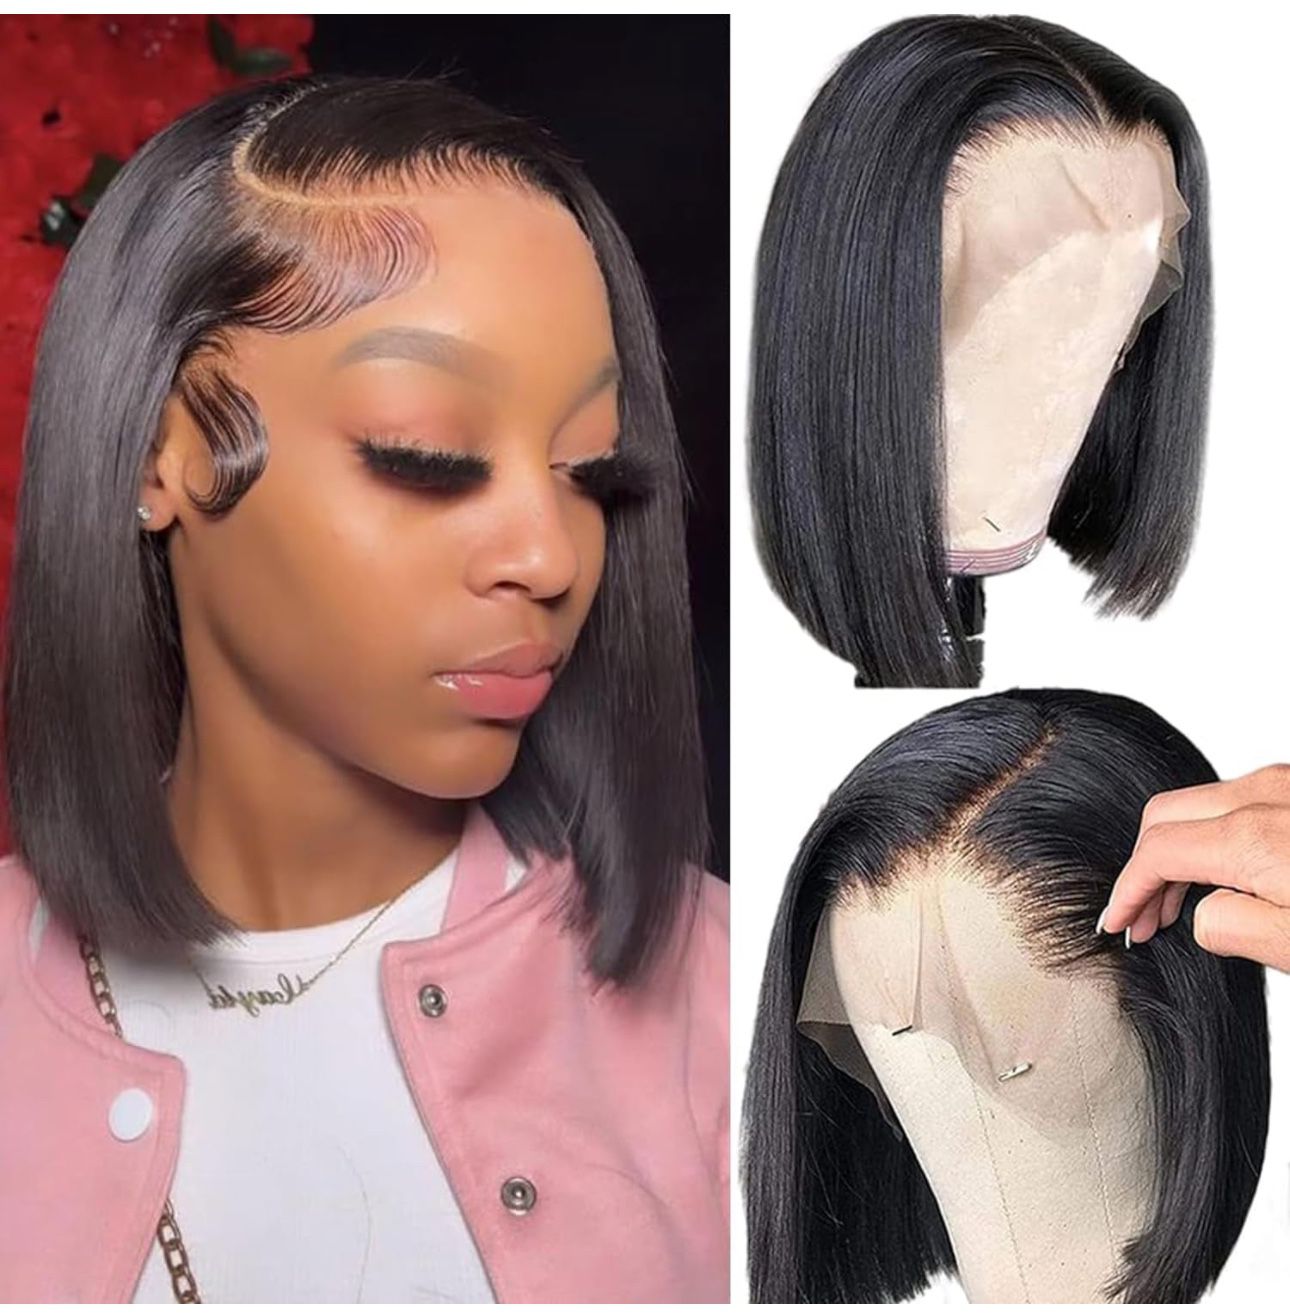 NEW/SEALED Bob Wig Human Hair 13x6 Straight HD Lace Front Wigs Human Hair 180% Density Glueless Wigs Human Hair Pre Plucked Short Bob Wigs for W